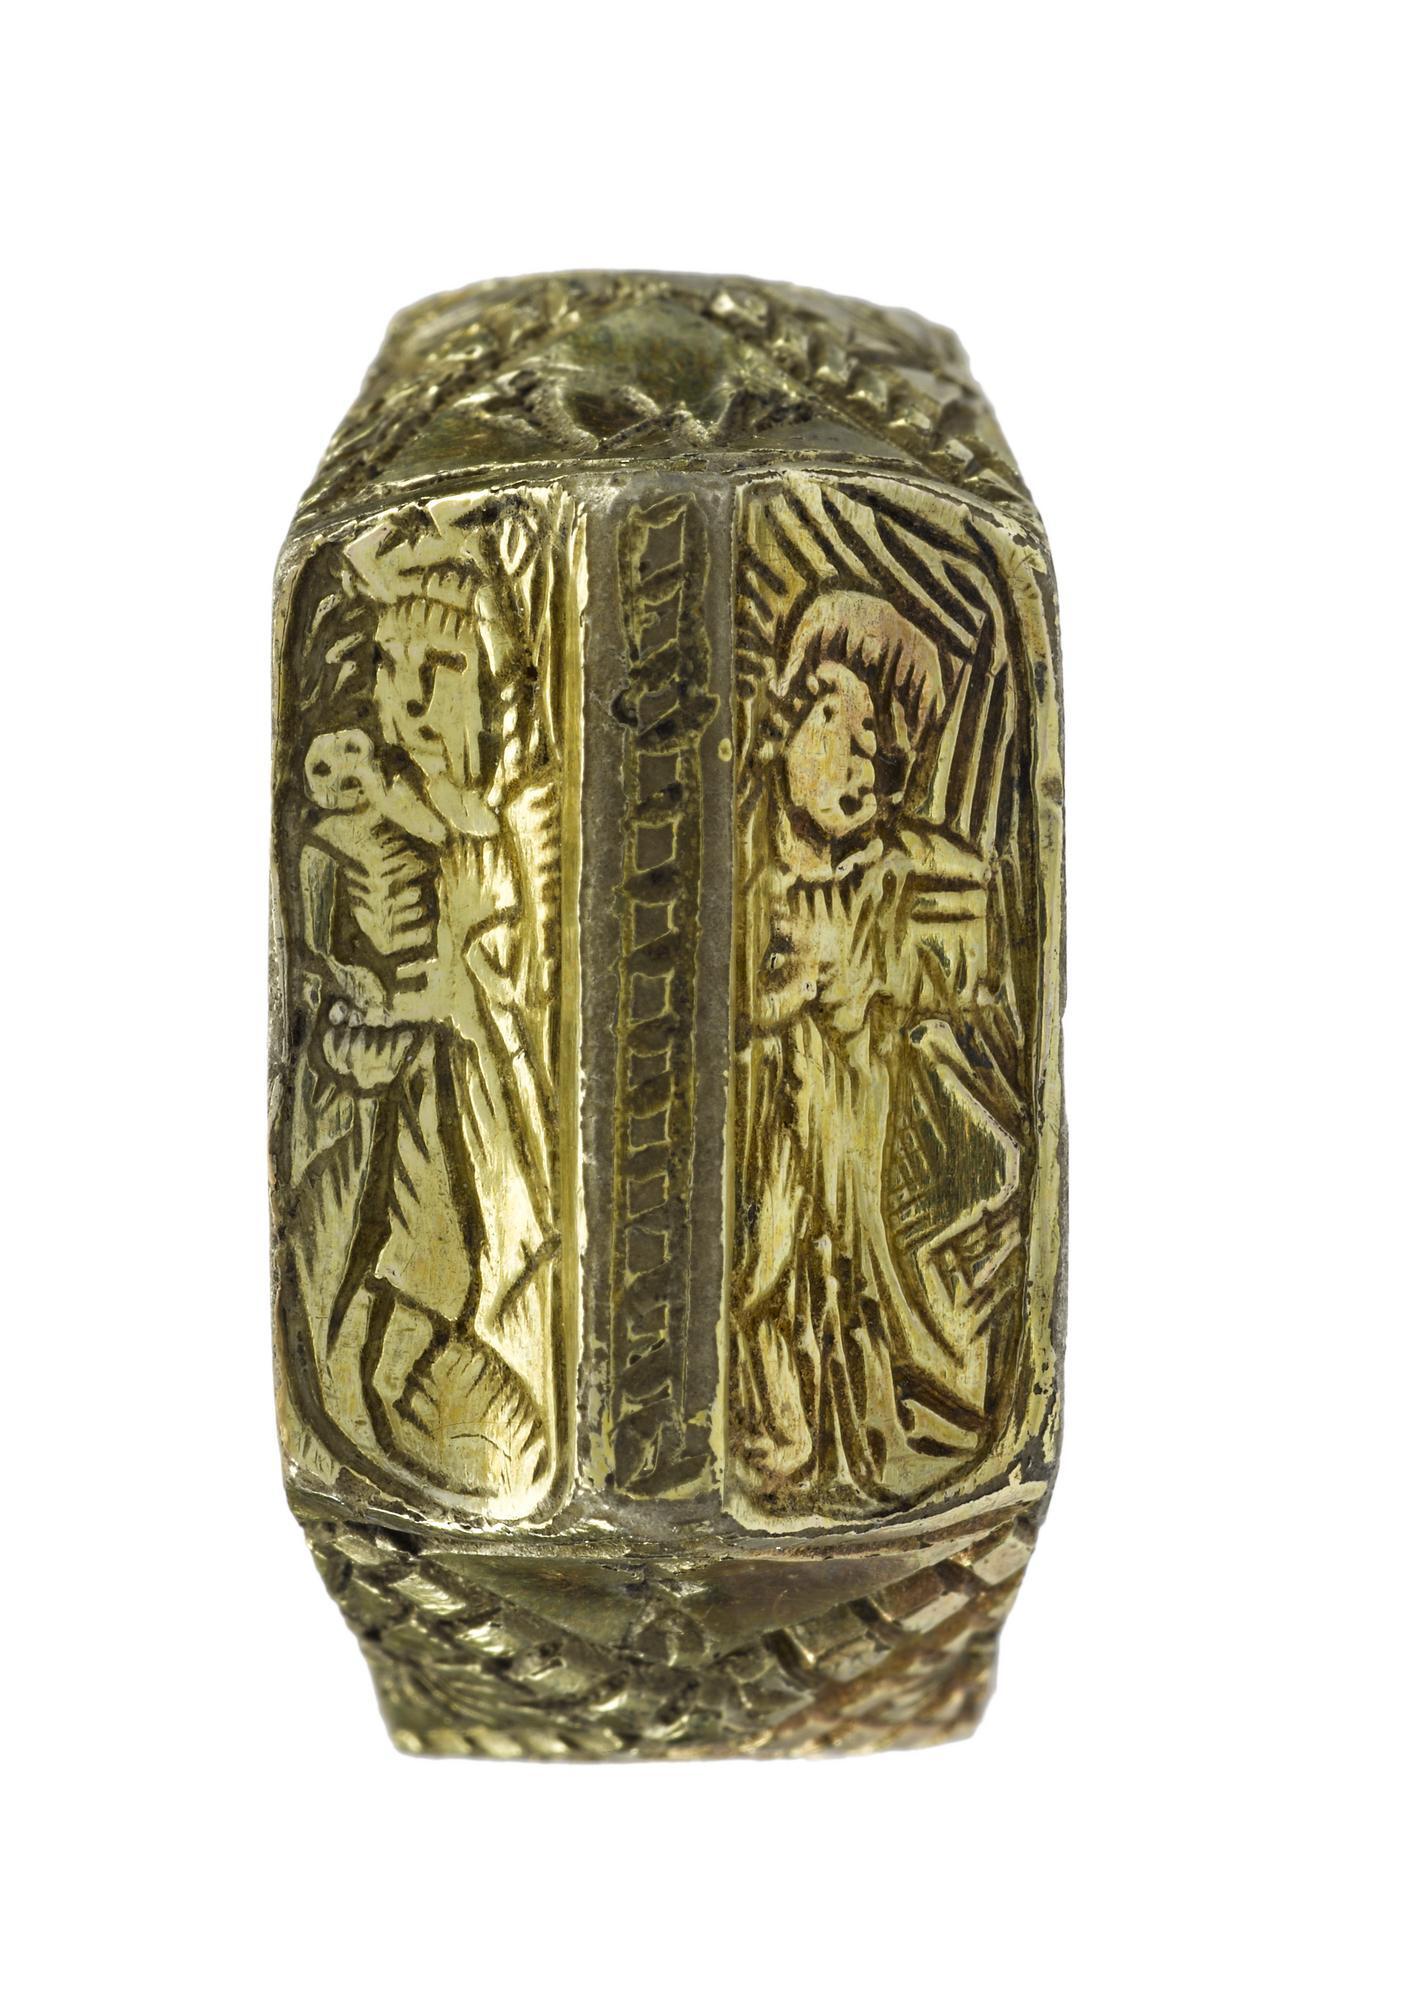 Image of Iconographic ring of silver-gilt from Hume Castle, Berwickshire, 15th century © National Museums Scotland